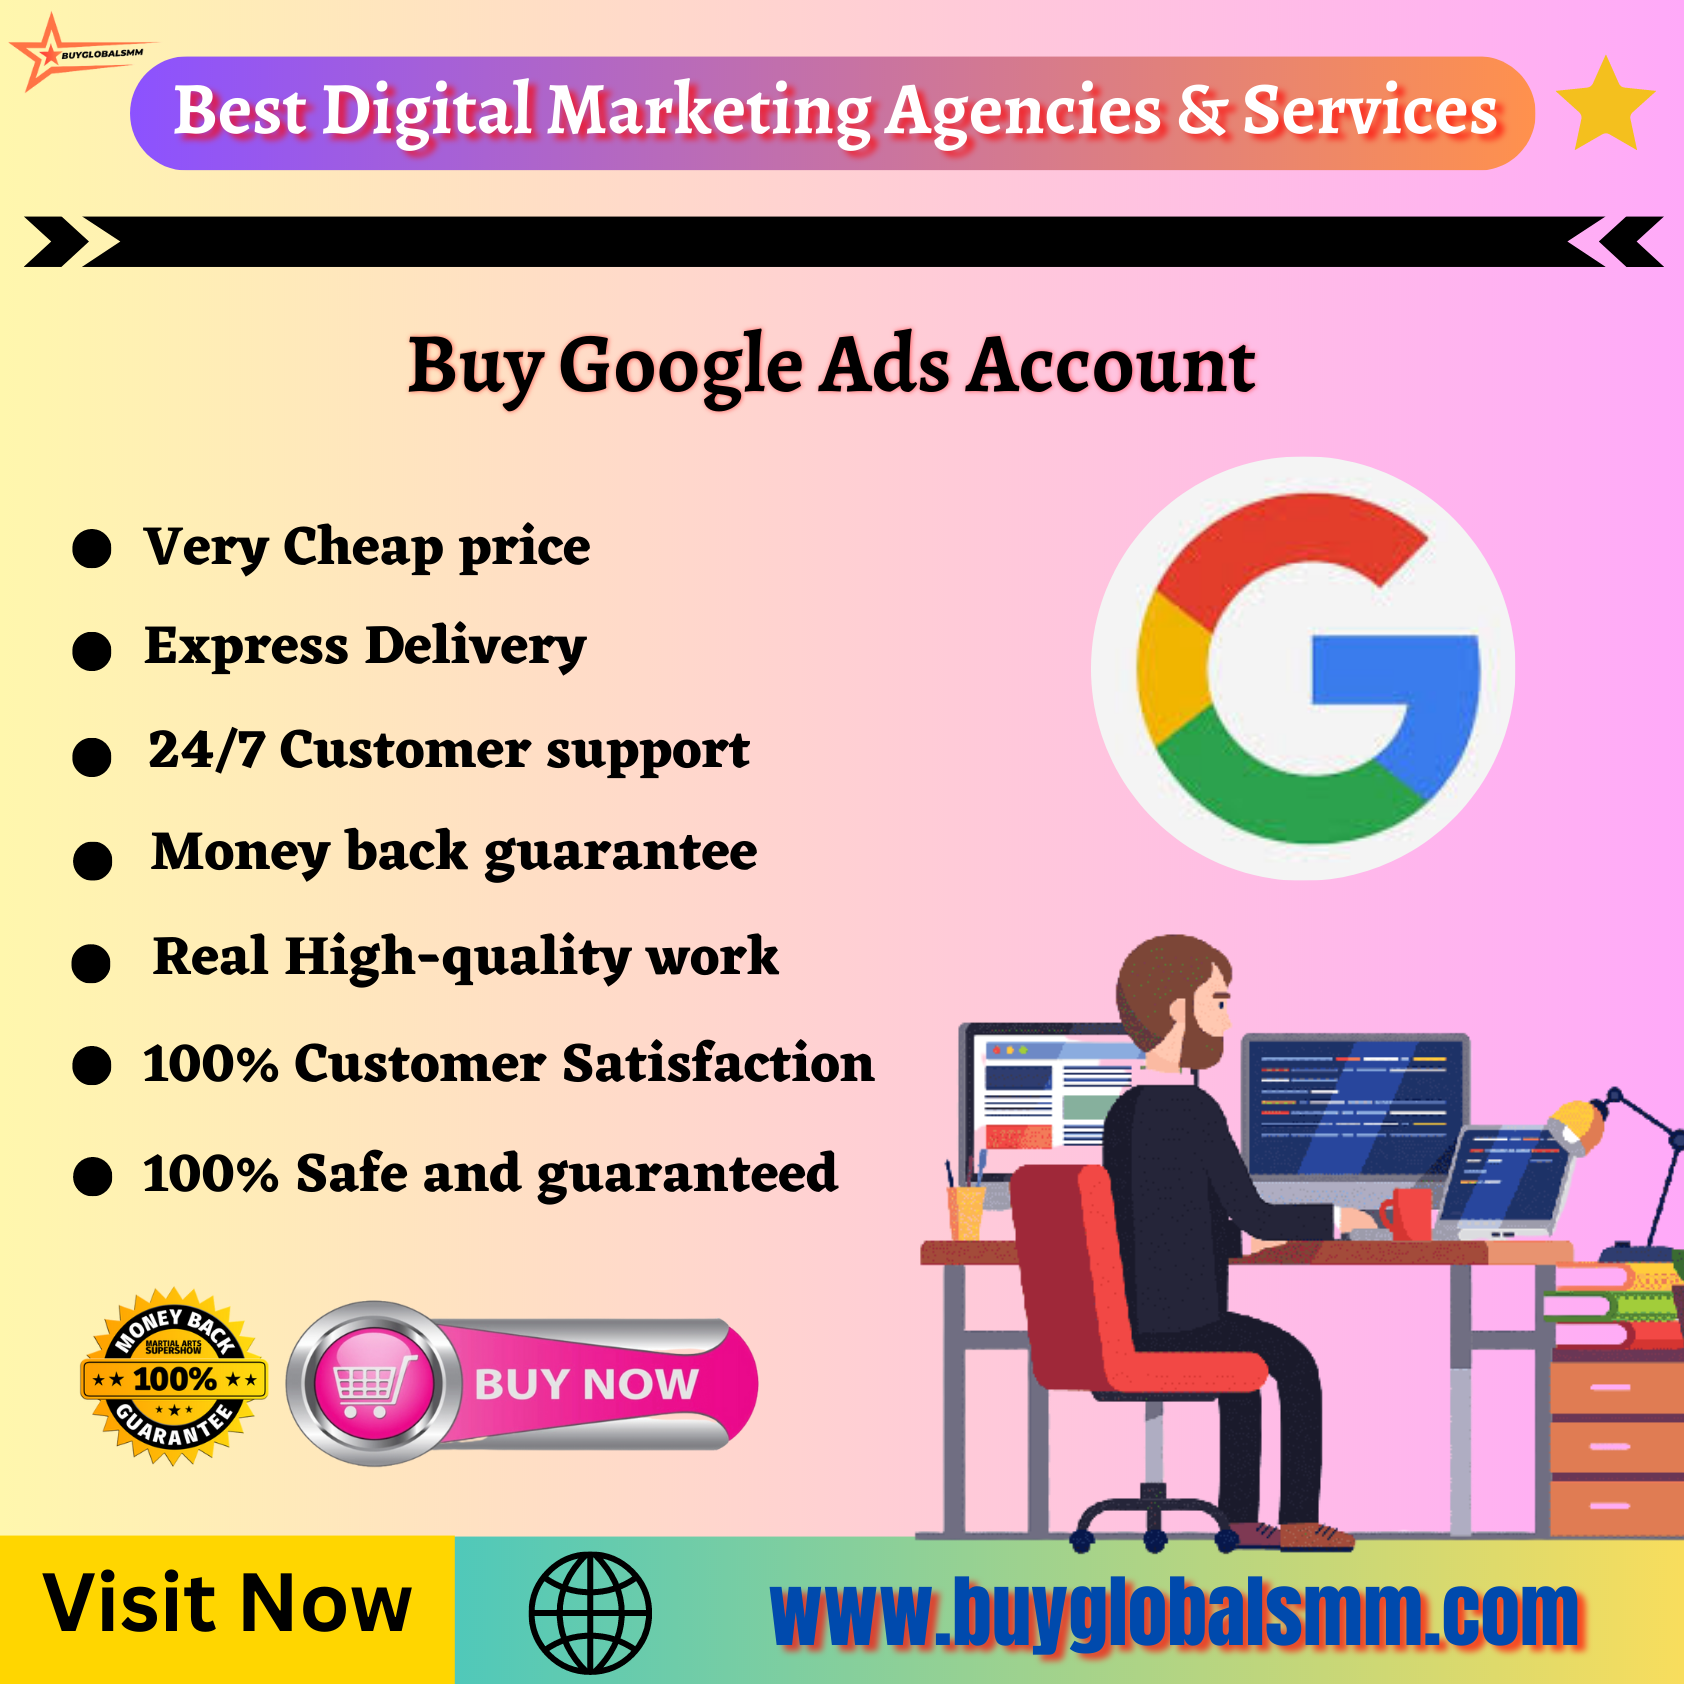 Buy Google Ads Account-100% trusted service, and cheap...